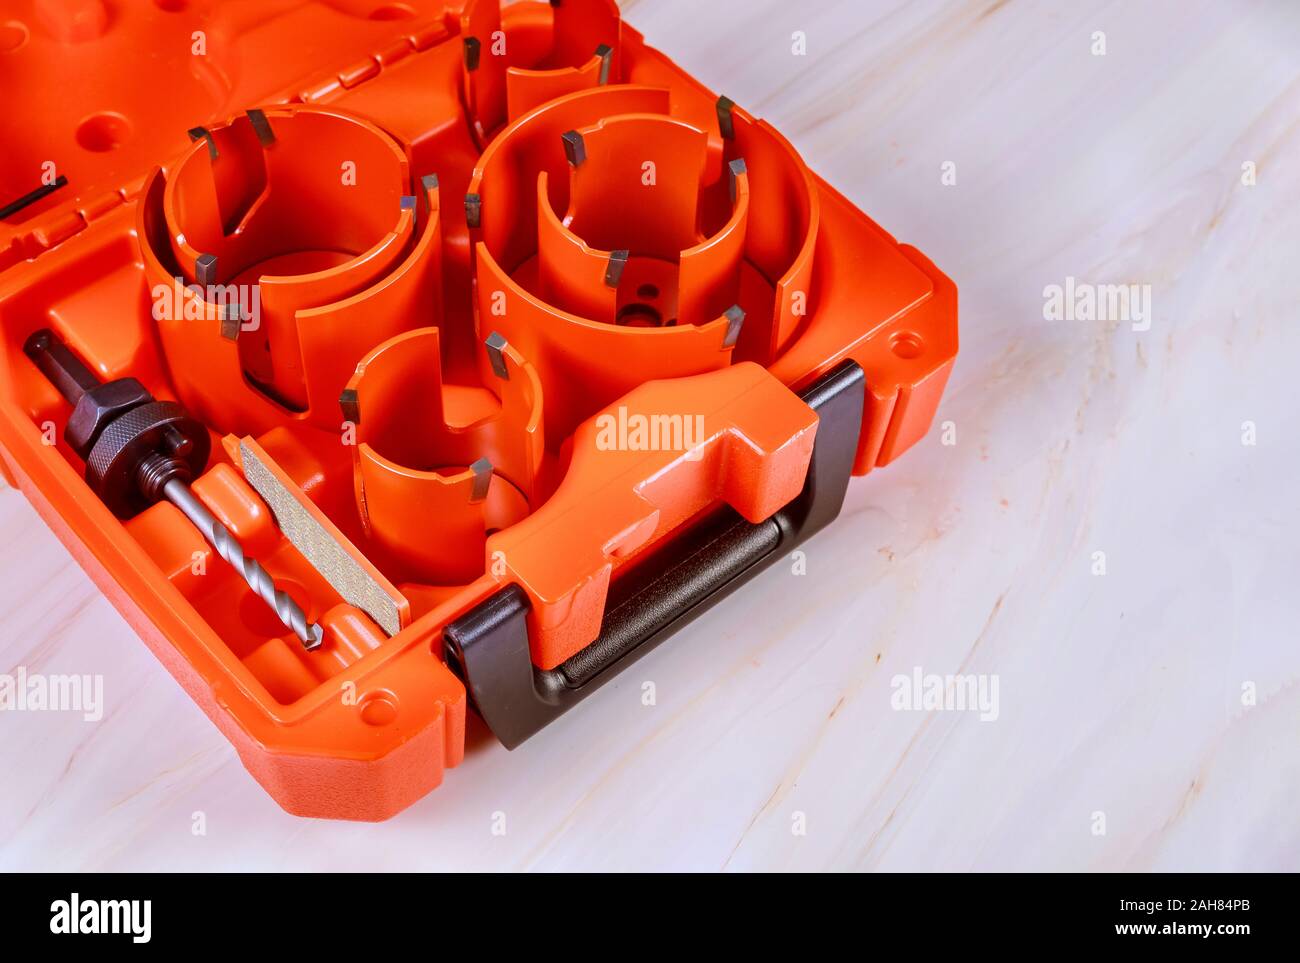 Hole making tools, a device for making holes in wood using a duty drill bits Stock Photo